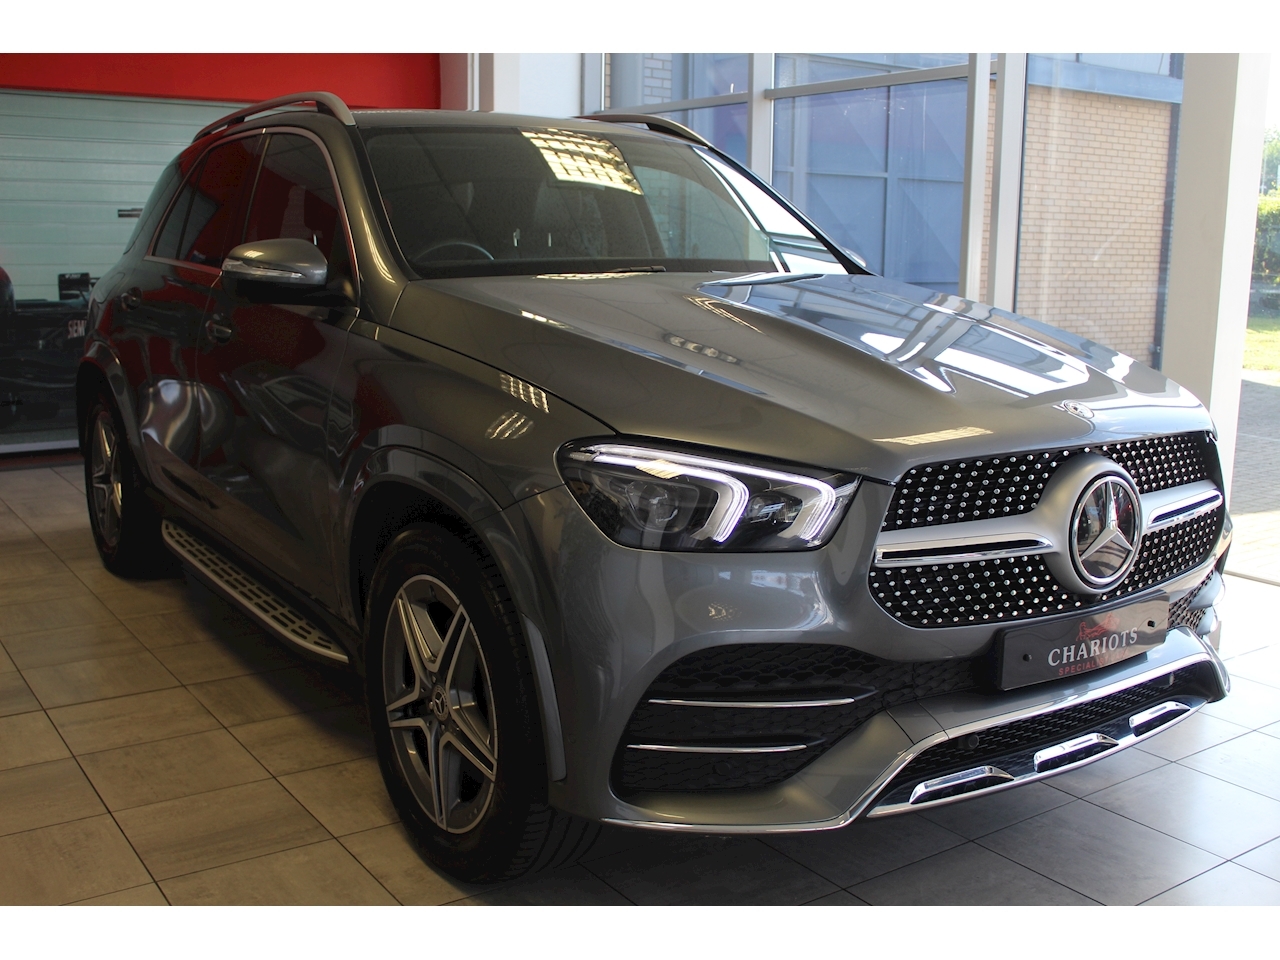 2.0 GLE300d AMG Line (Premium) SUV 5dr Diesel G-Tronic 4MATIC (s/s) (245 ps)